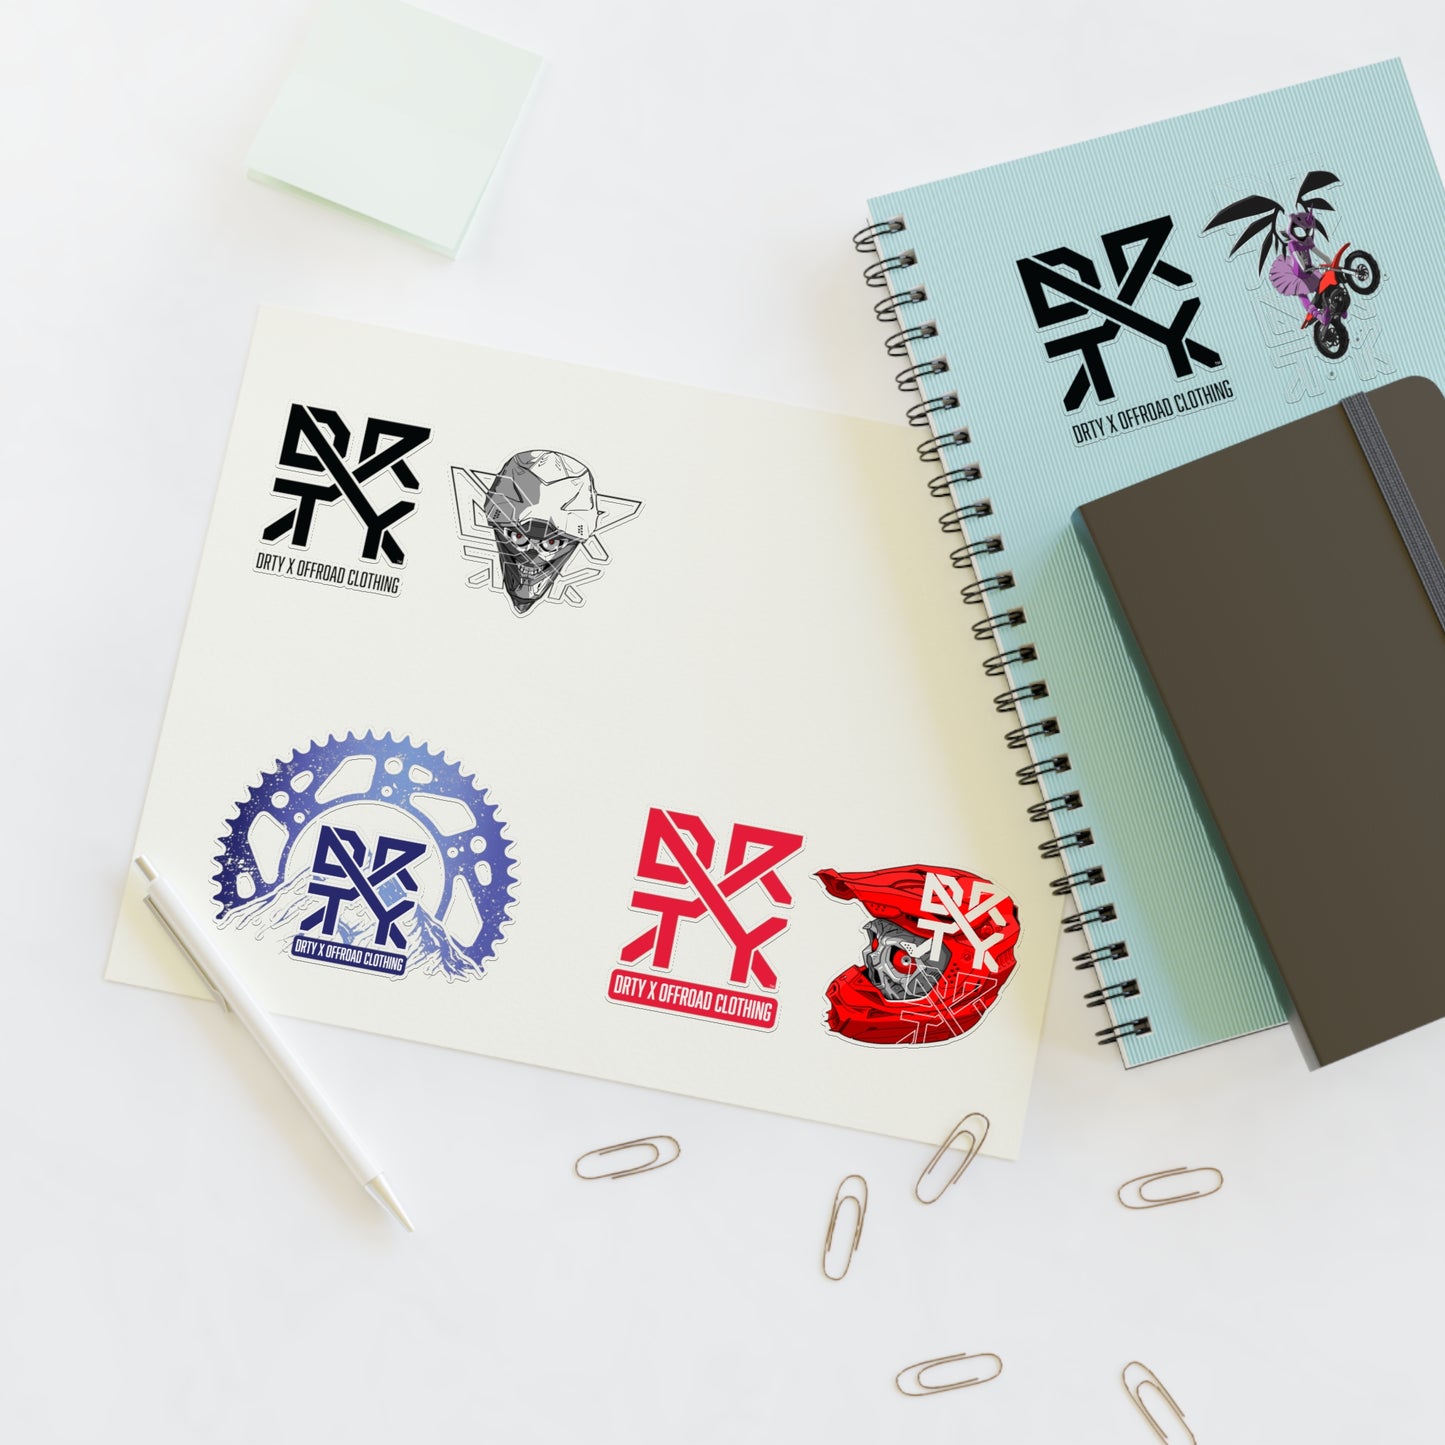 This image shows a small DRTY X Logo and artwork sticker on a notepad,and sticker sheet on a table.